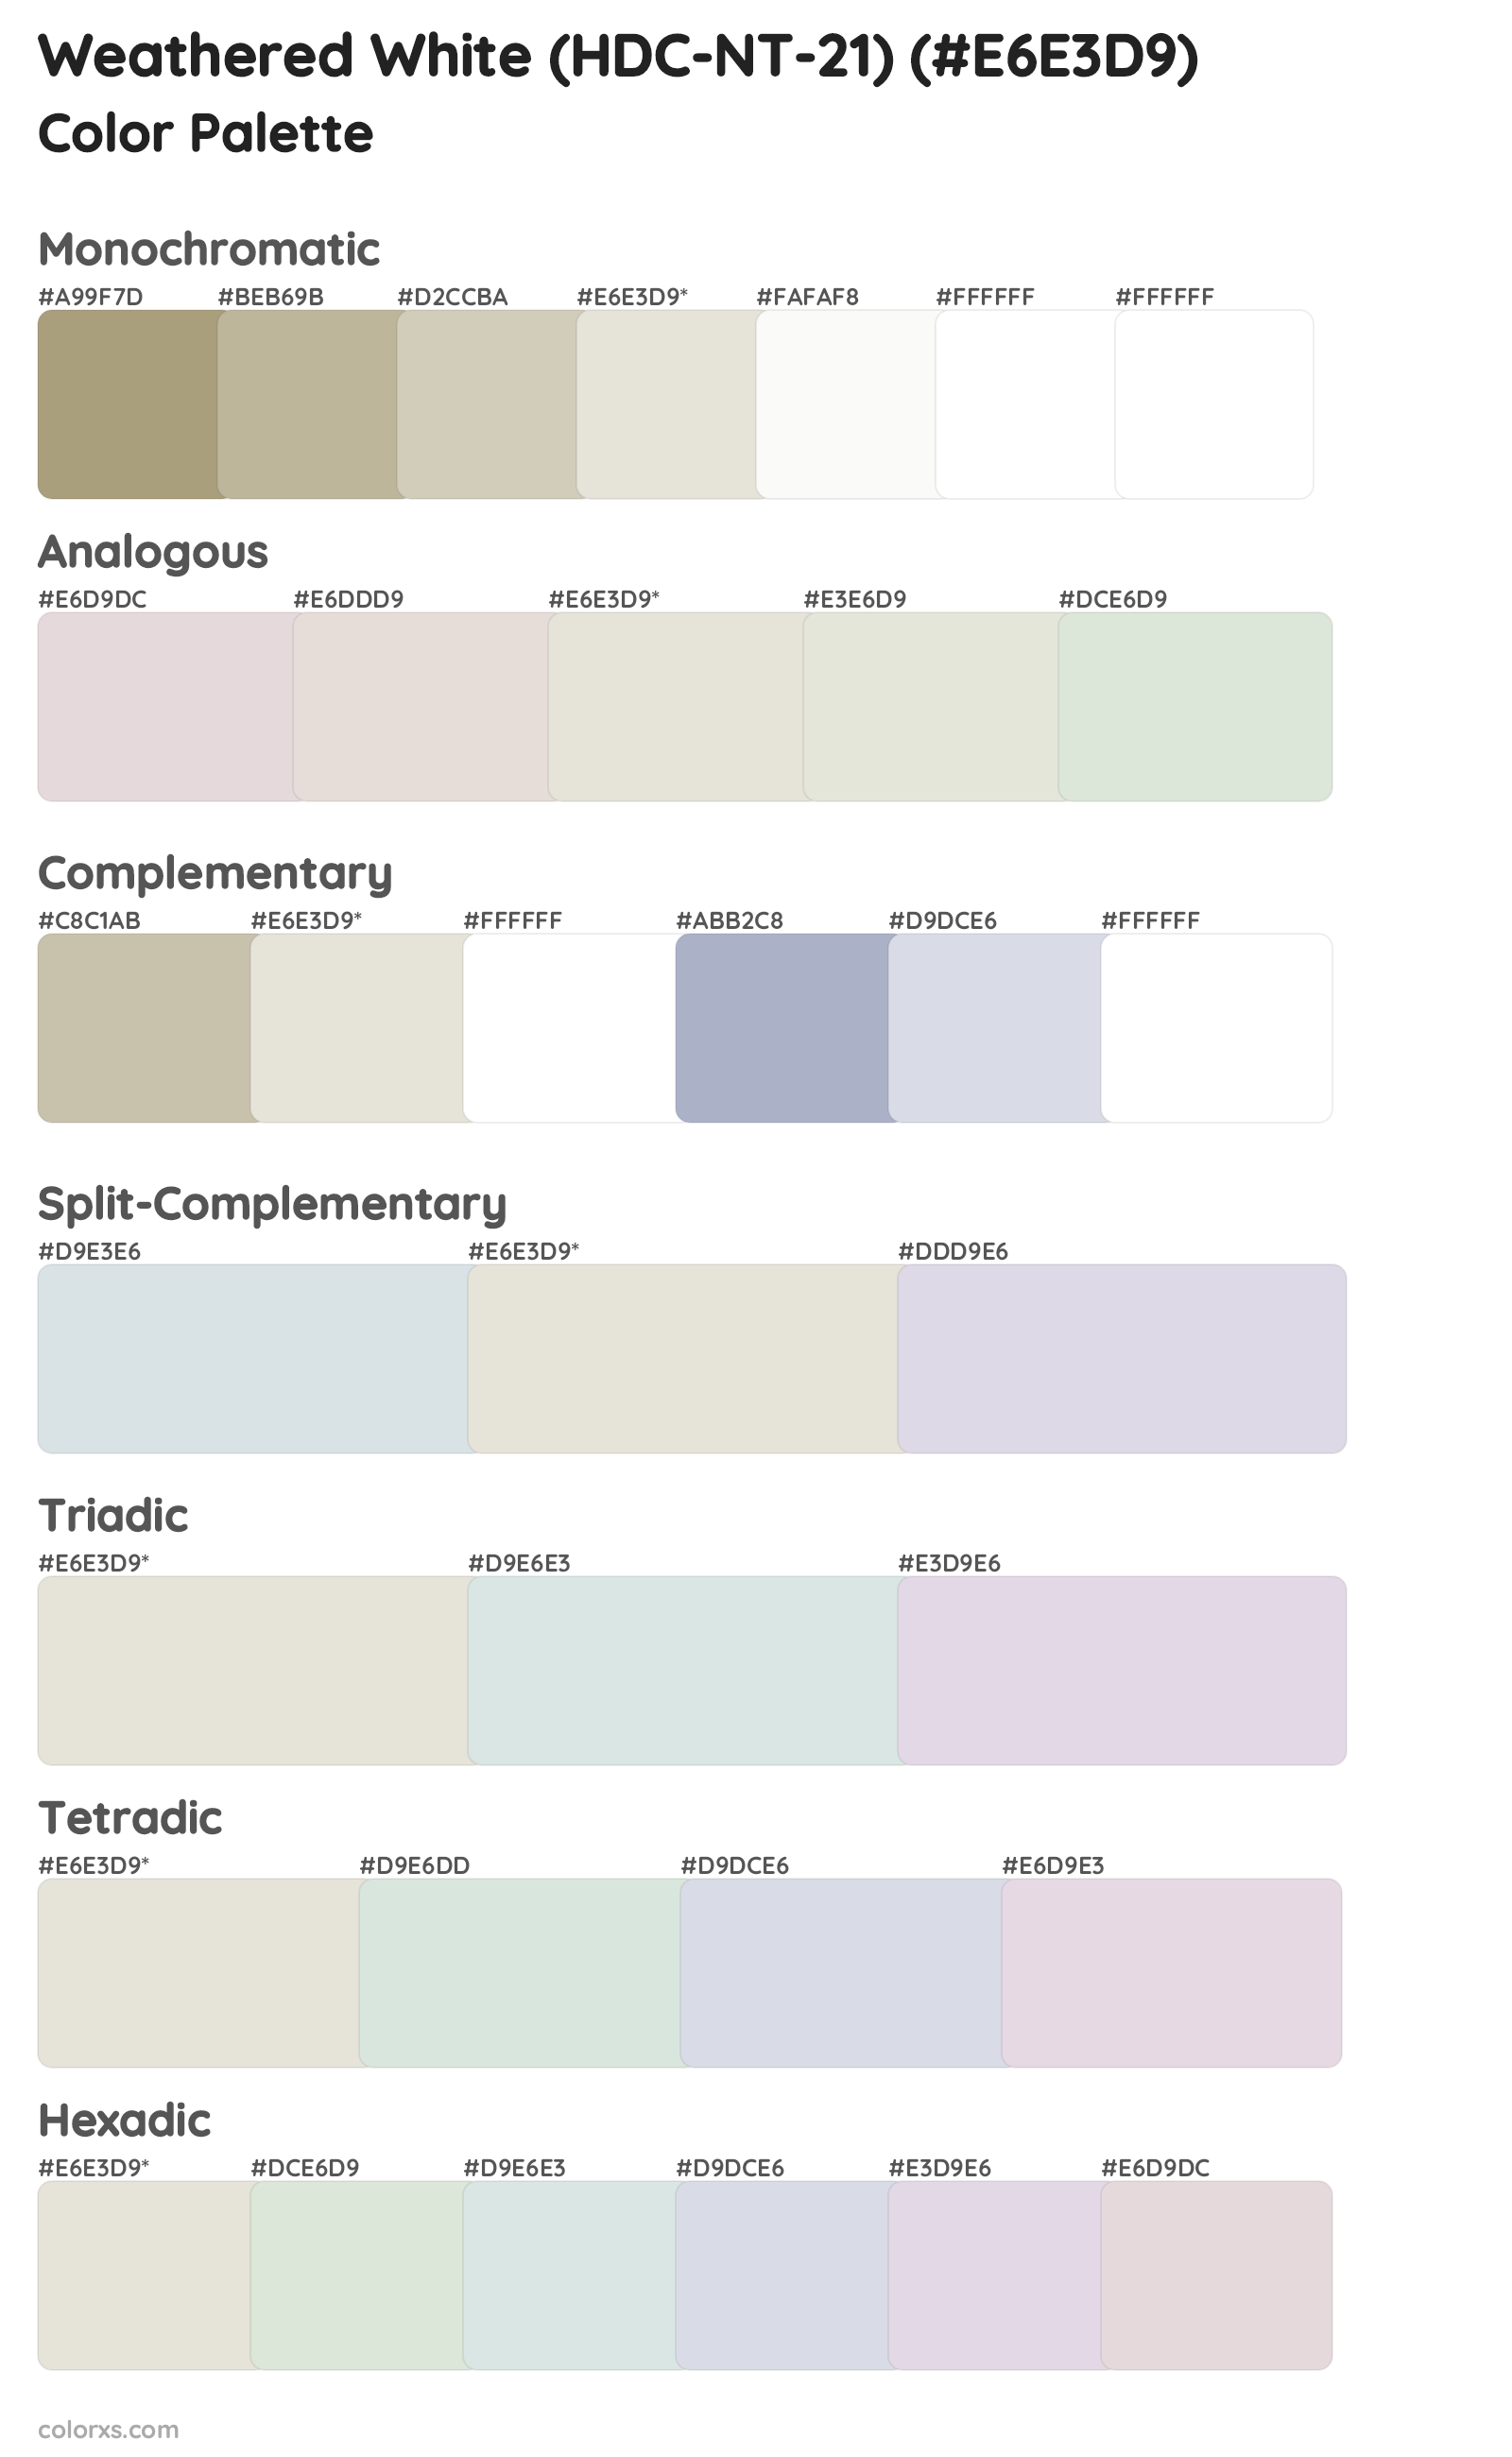 Weathered White (HDC-NT-21) Color Scheme Palettes